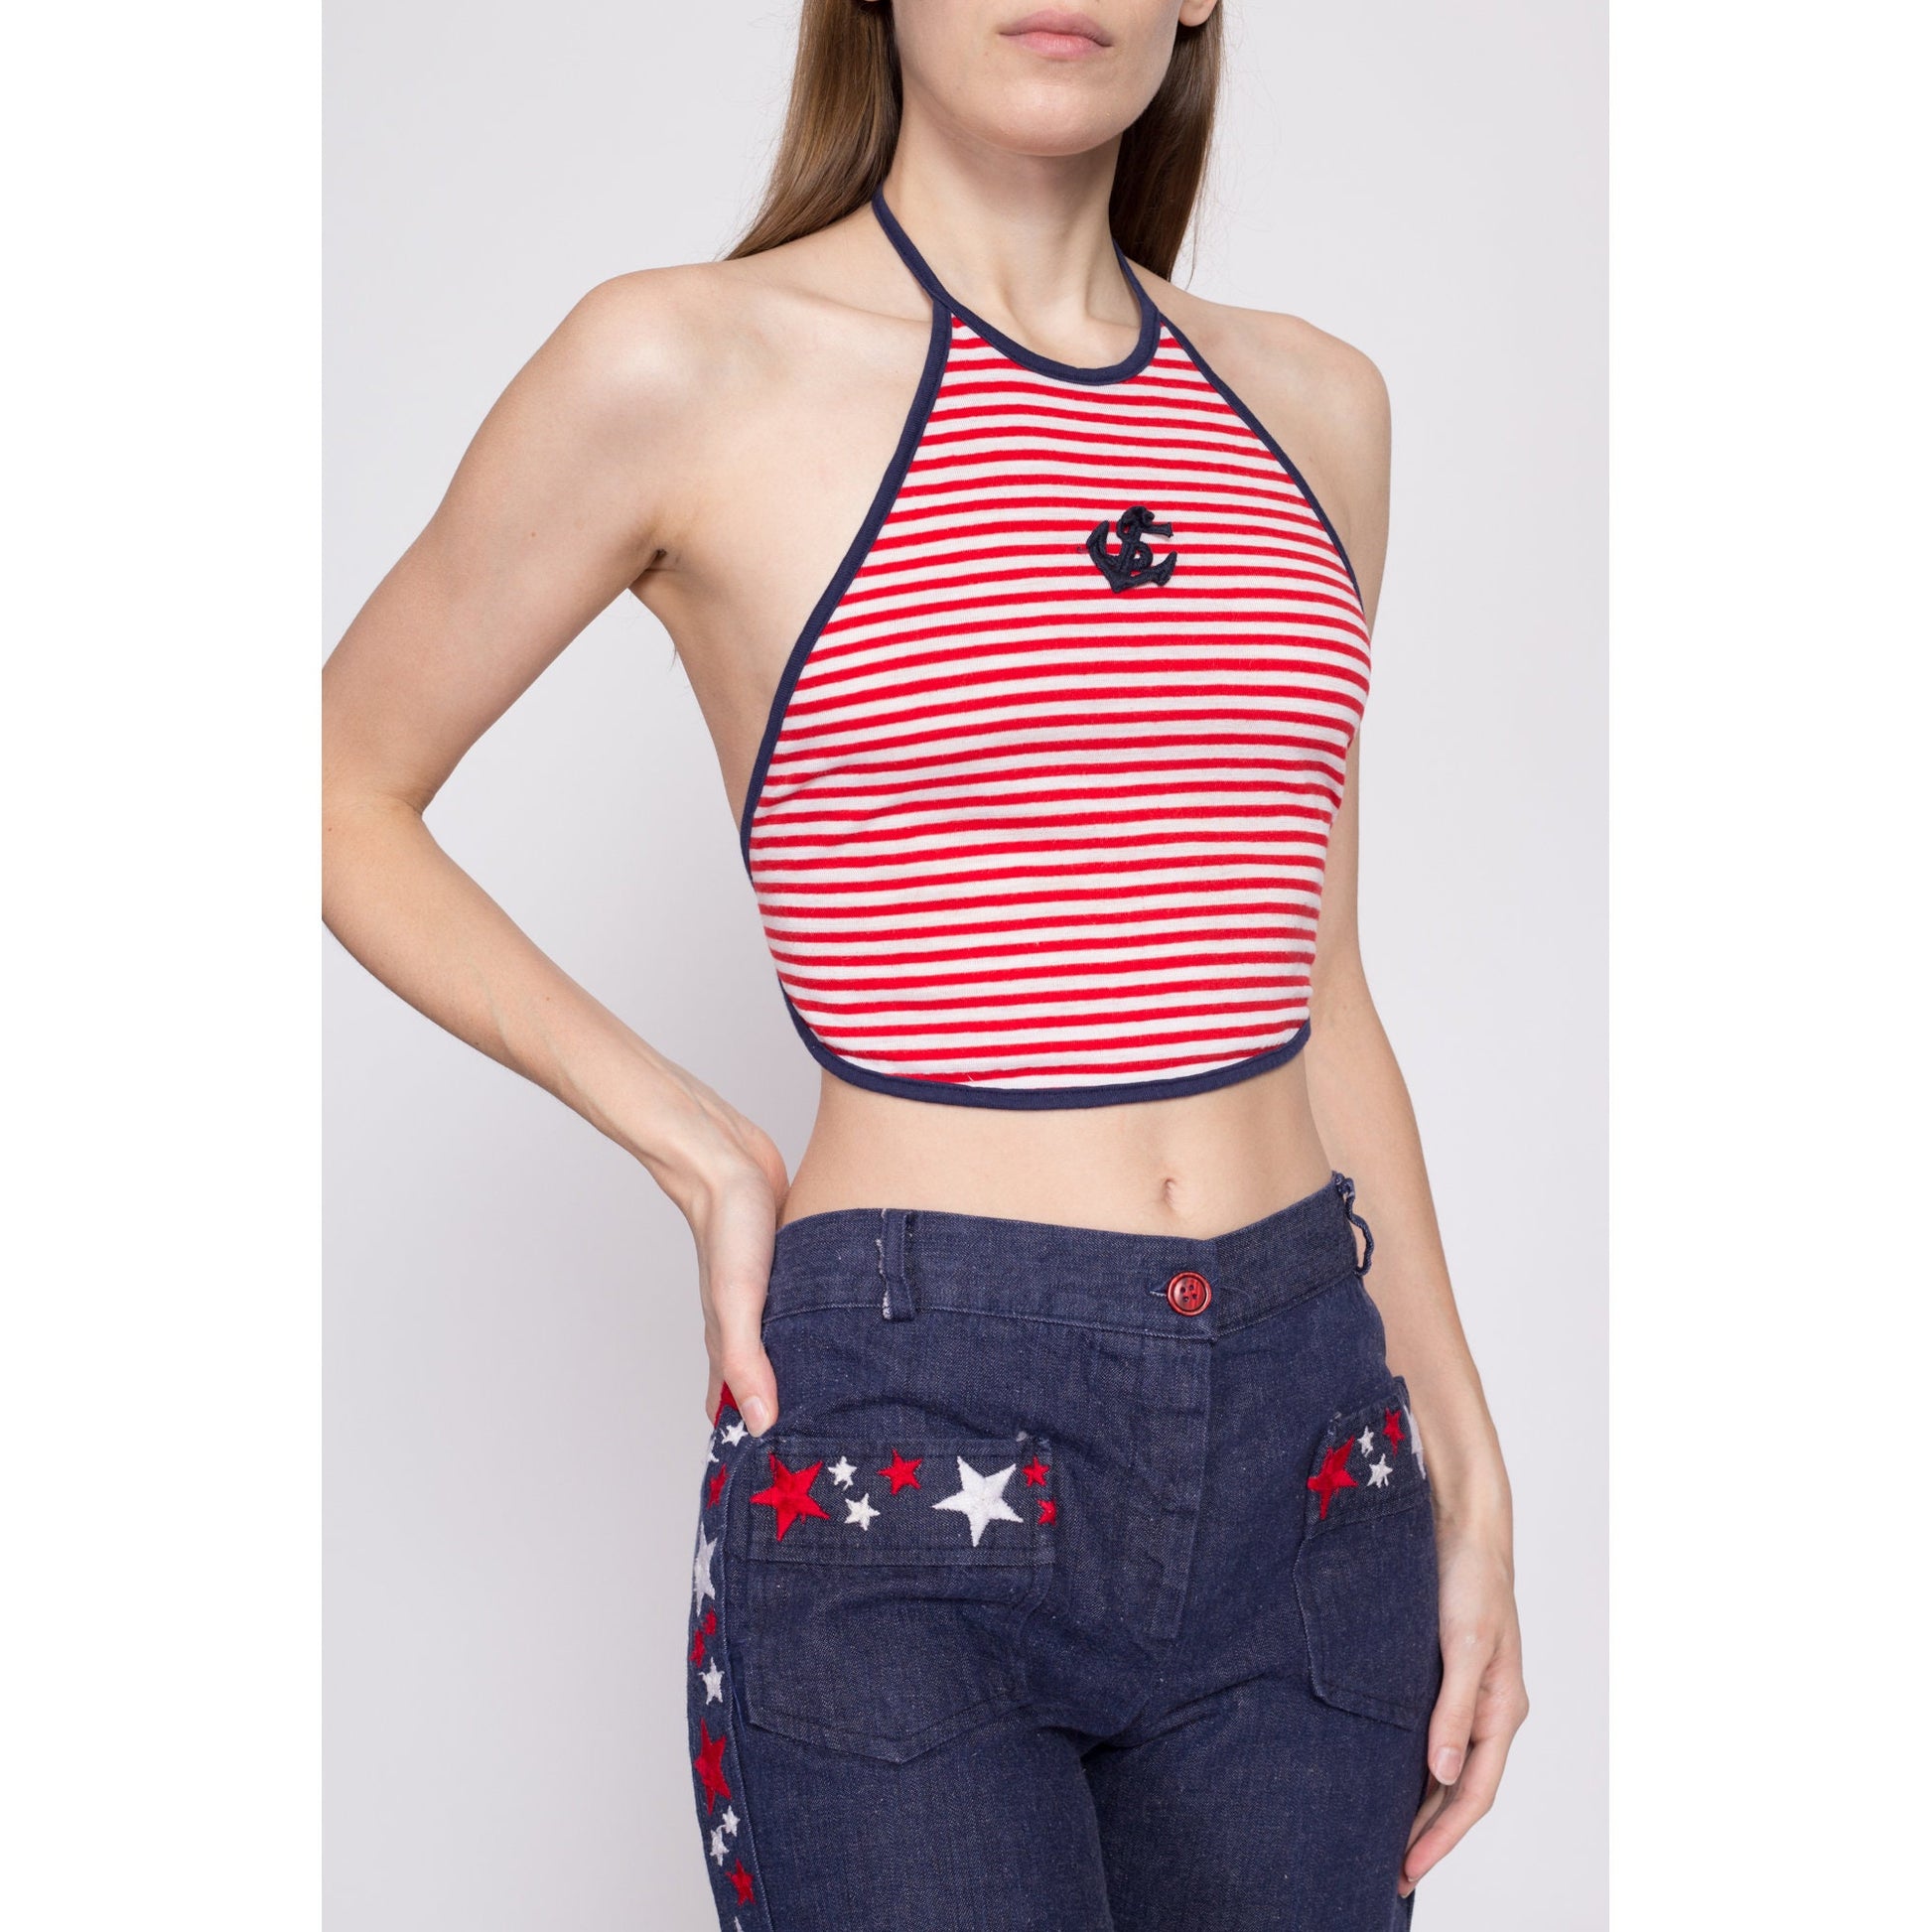 70s Nautical Striped Backless Halter Crop Top - Small – Flying Apple Vintage